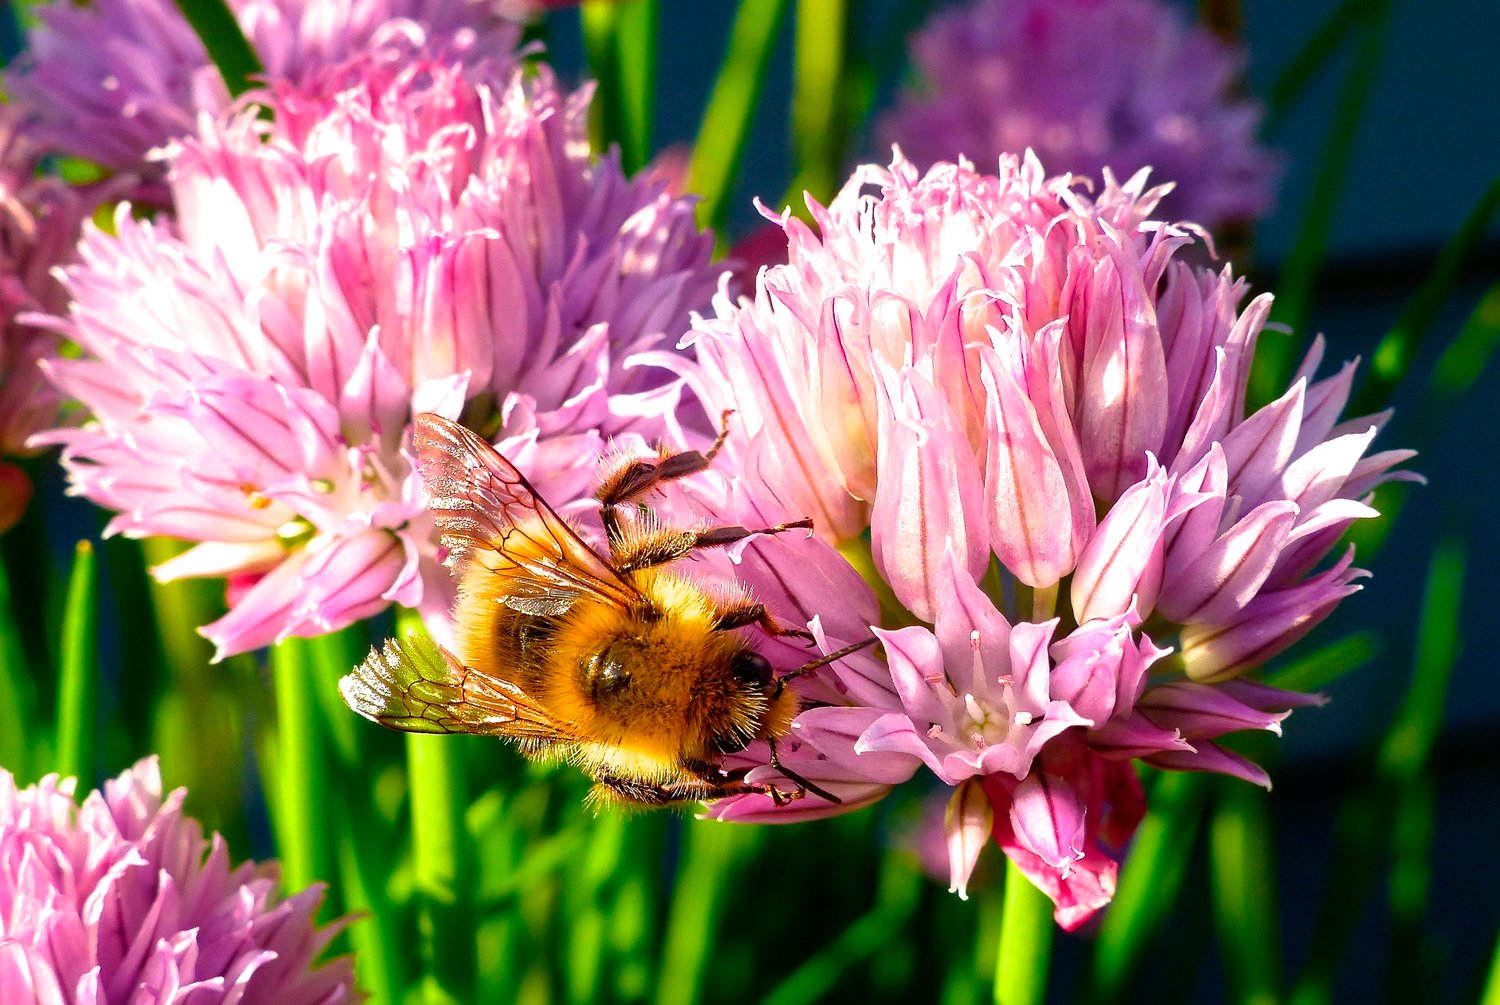 SPRING BUZZ — Containerized chive blossoms, which attract a variety of bee species. Gardeners opt for more herbs in their yards for culinary use but also to attract pollinators.